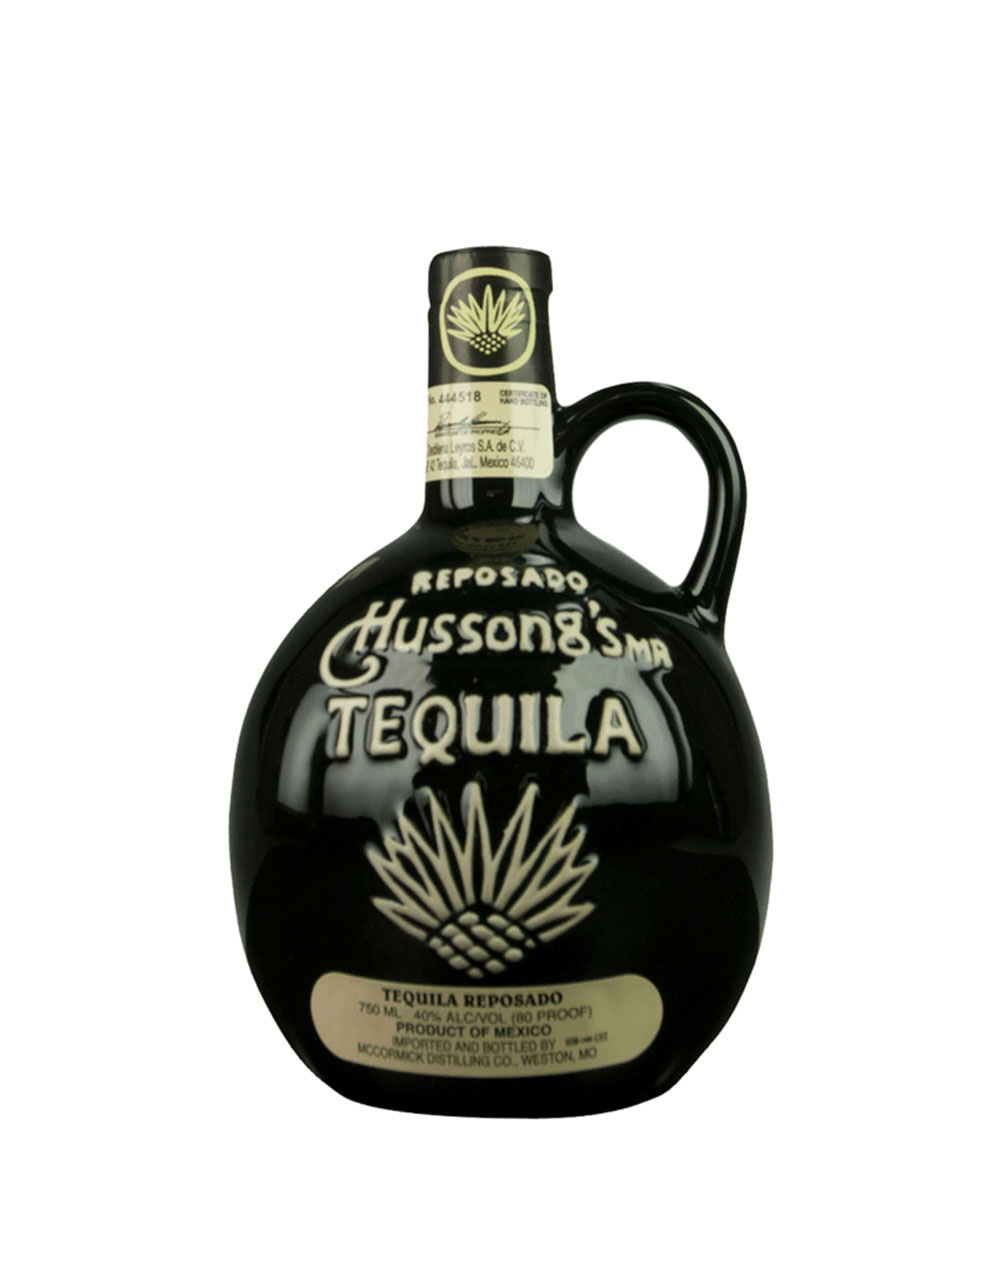 Hussong's MR Reposado Tequila